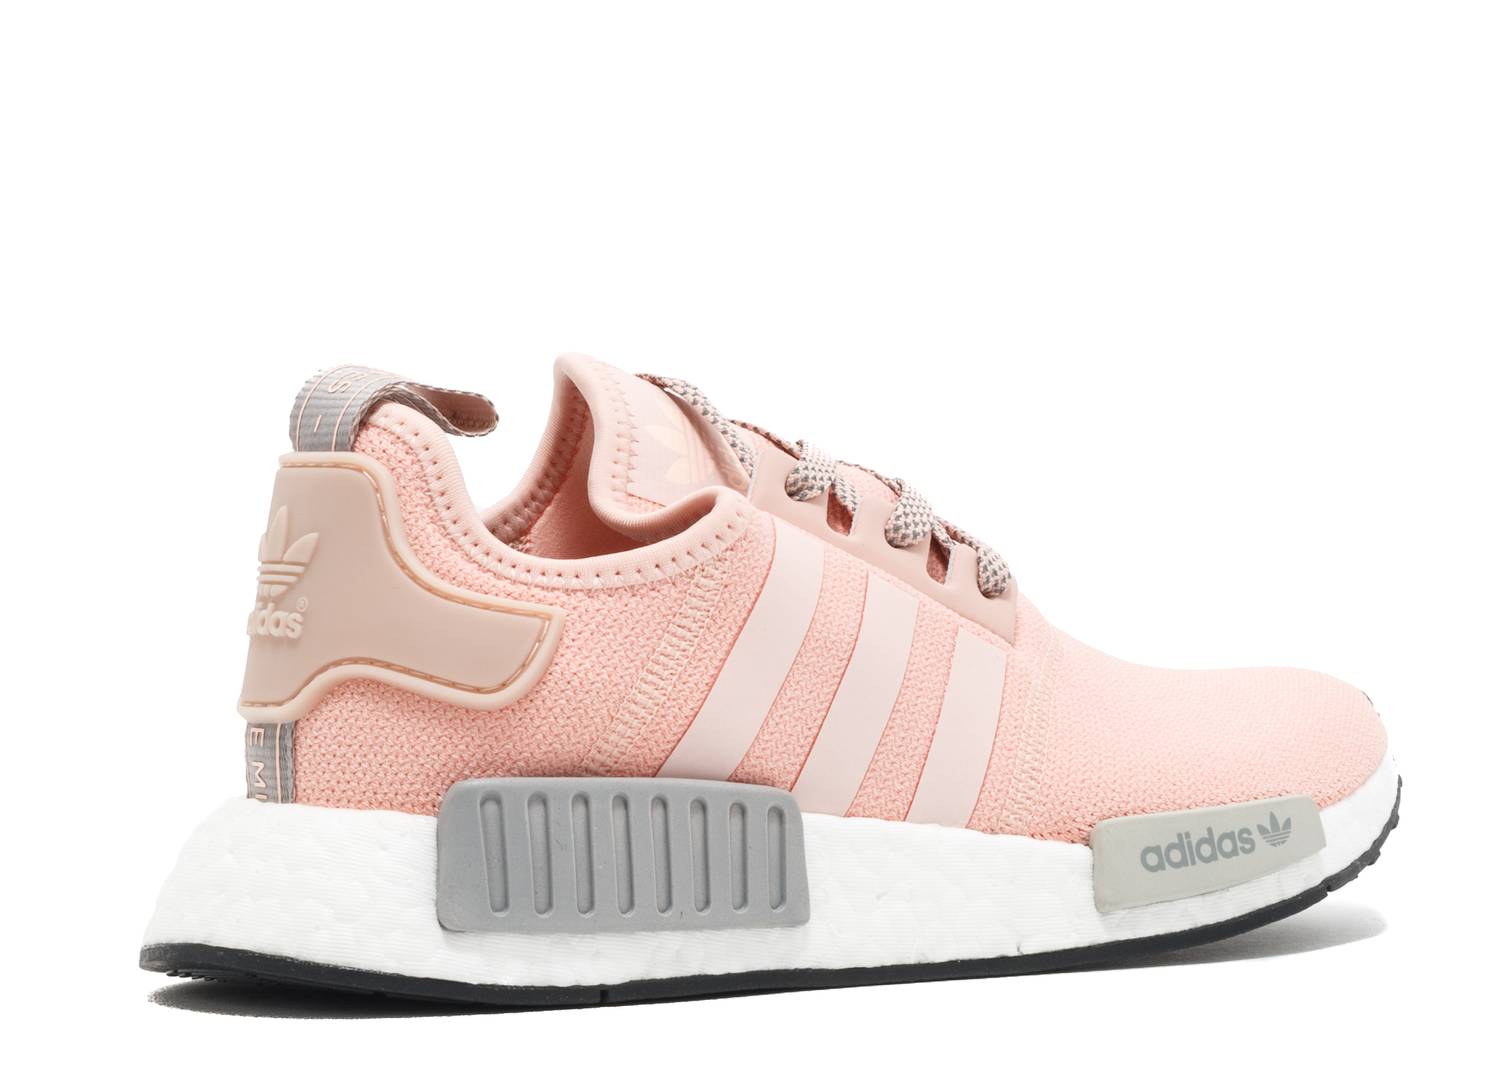 tæt Tidligere romantisk Adidas NMD R1 "Vapour Pink" – CommonGround12